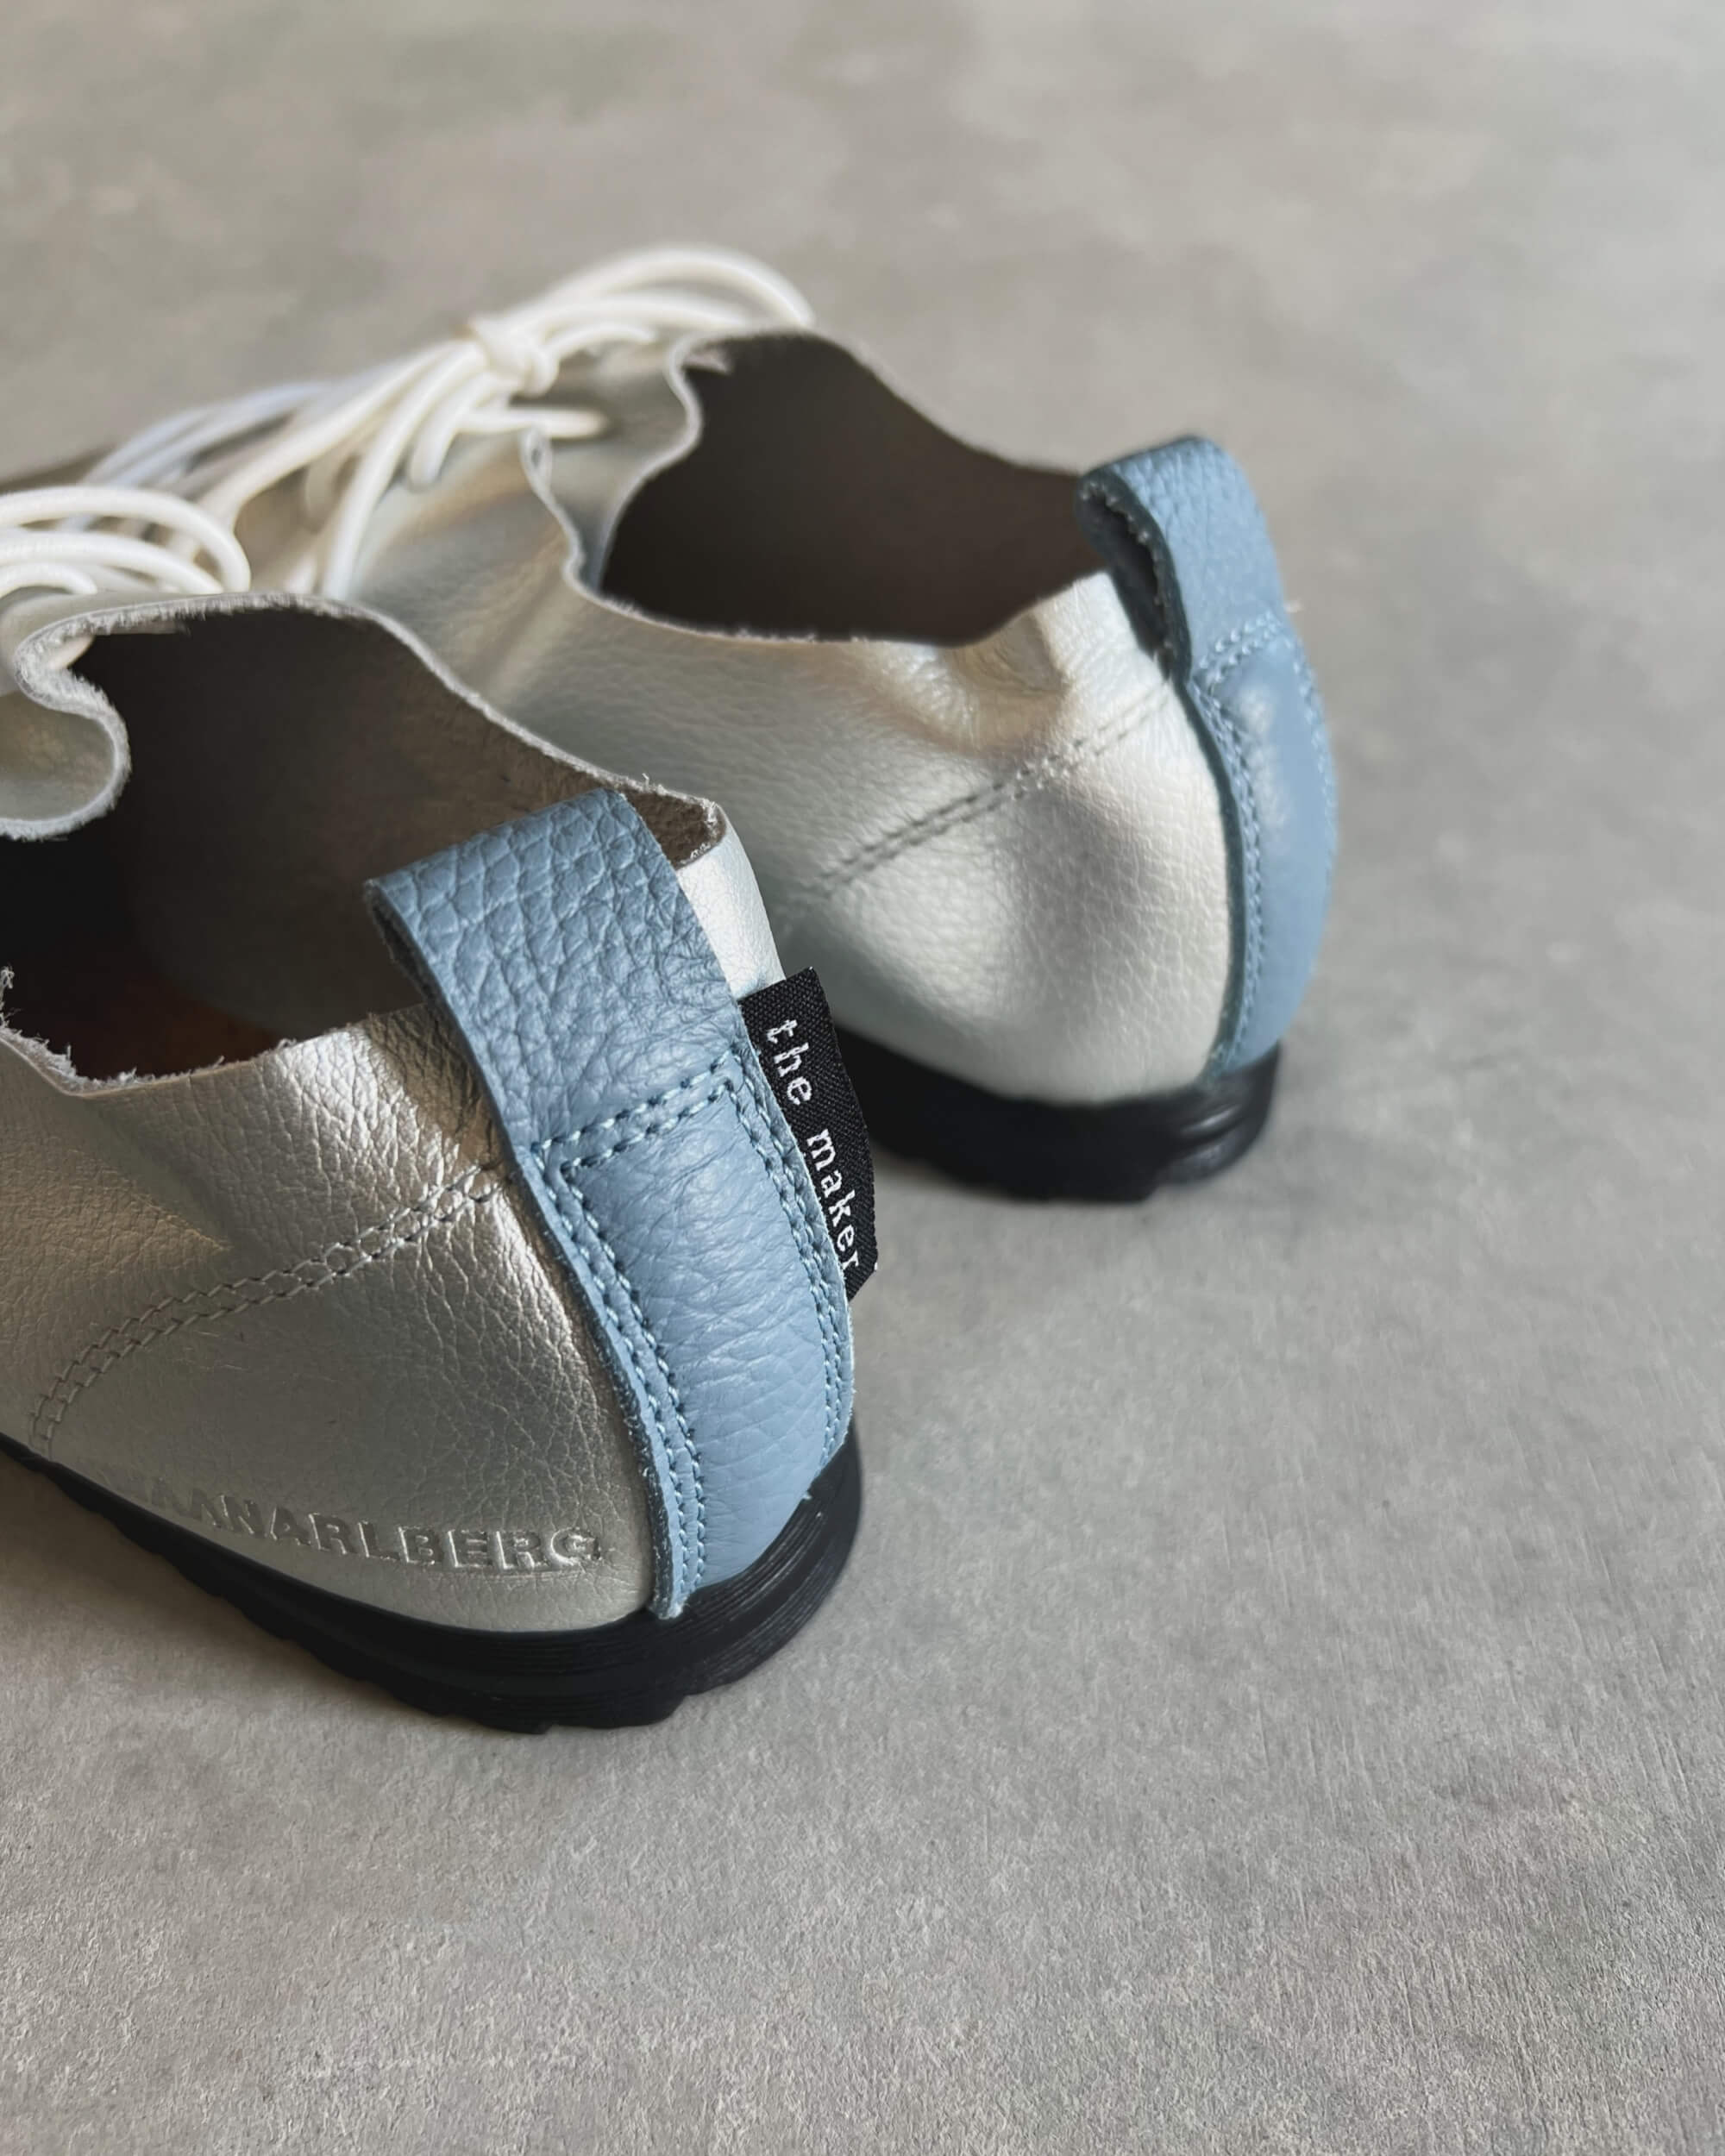 swaanarlberg : japanese leather shoes in silver